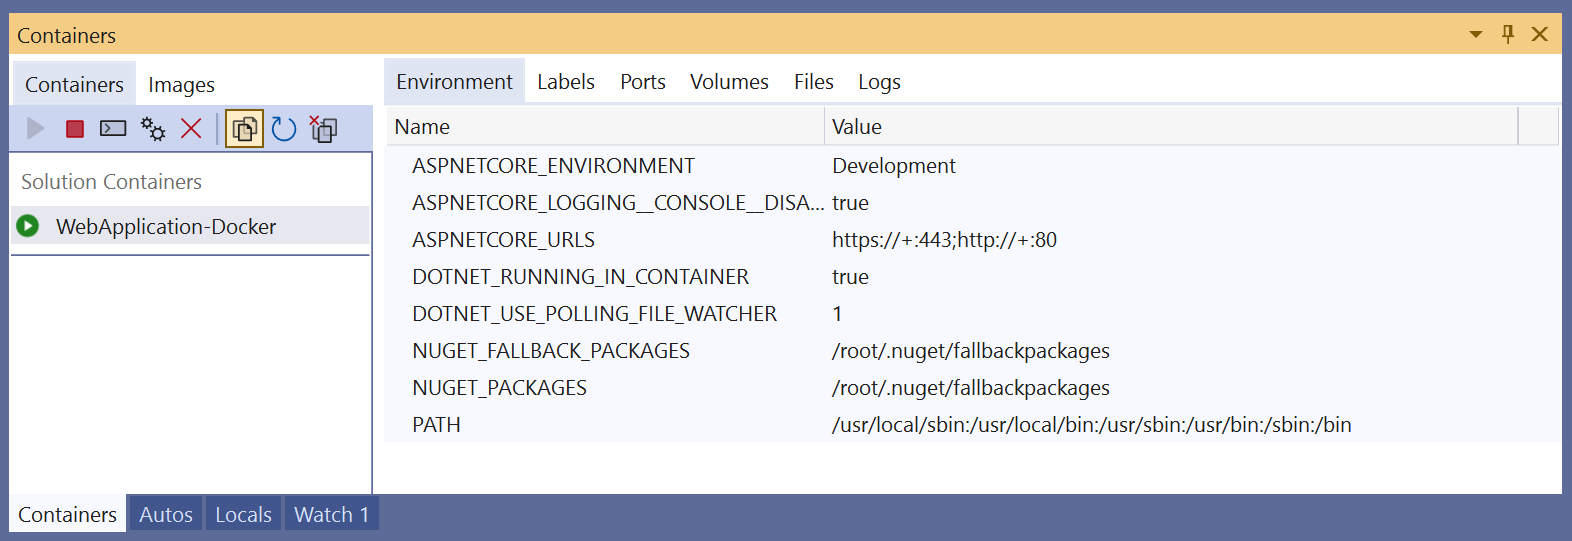 Screenshot of the Containers window in Visual Studio showing the Environment variables for a container.